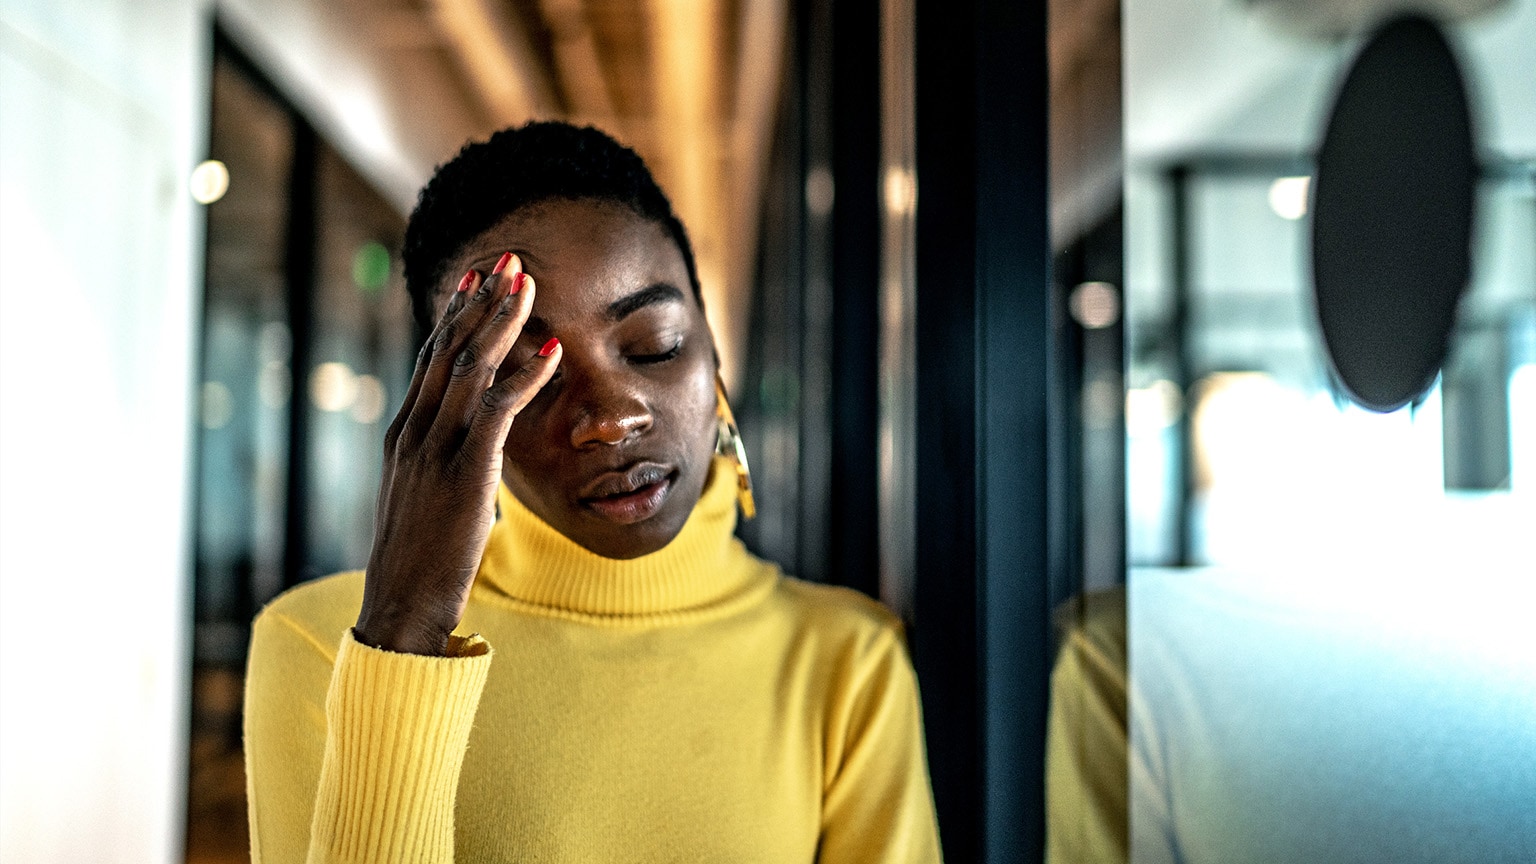 Image of a young Black women looking stressed